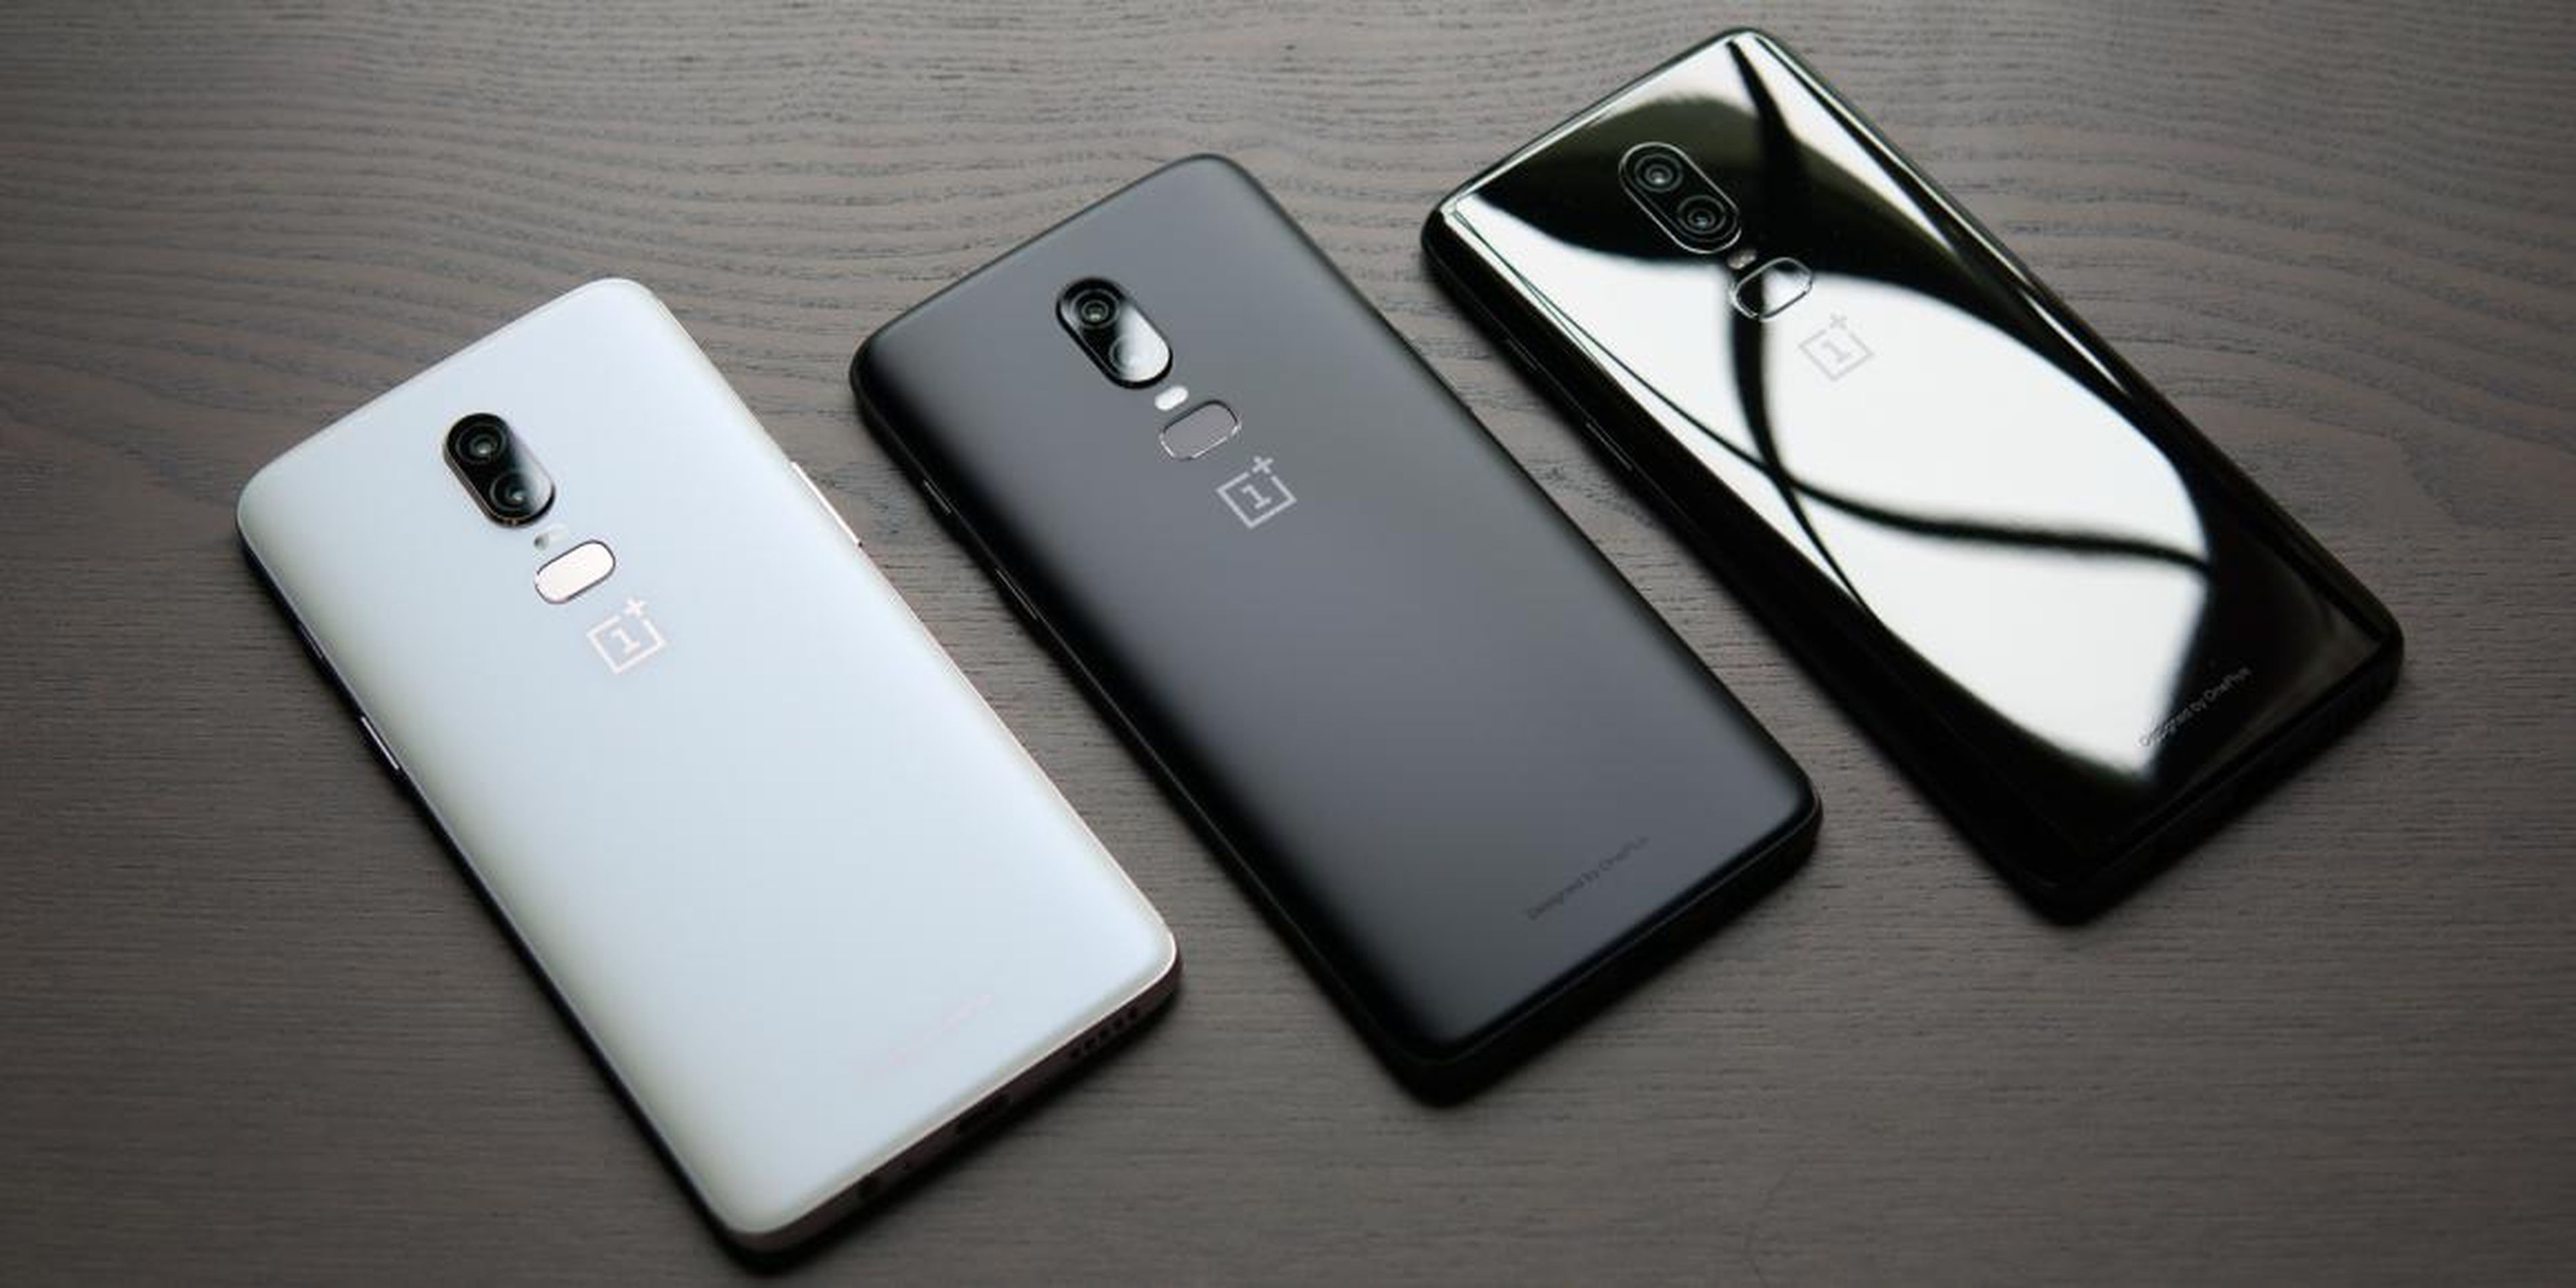 As the much-hyped startup Essential runs into troubles, a smaller company called OnePlus shows the right way to compete with Apple and Samsung